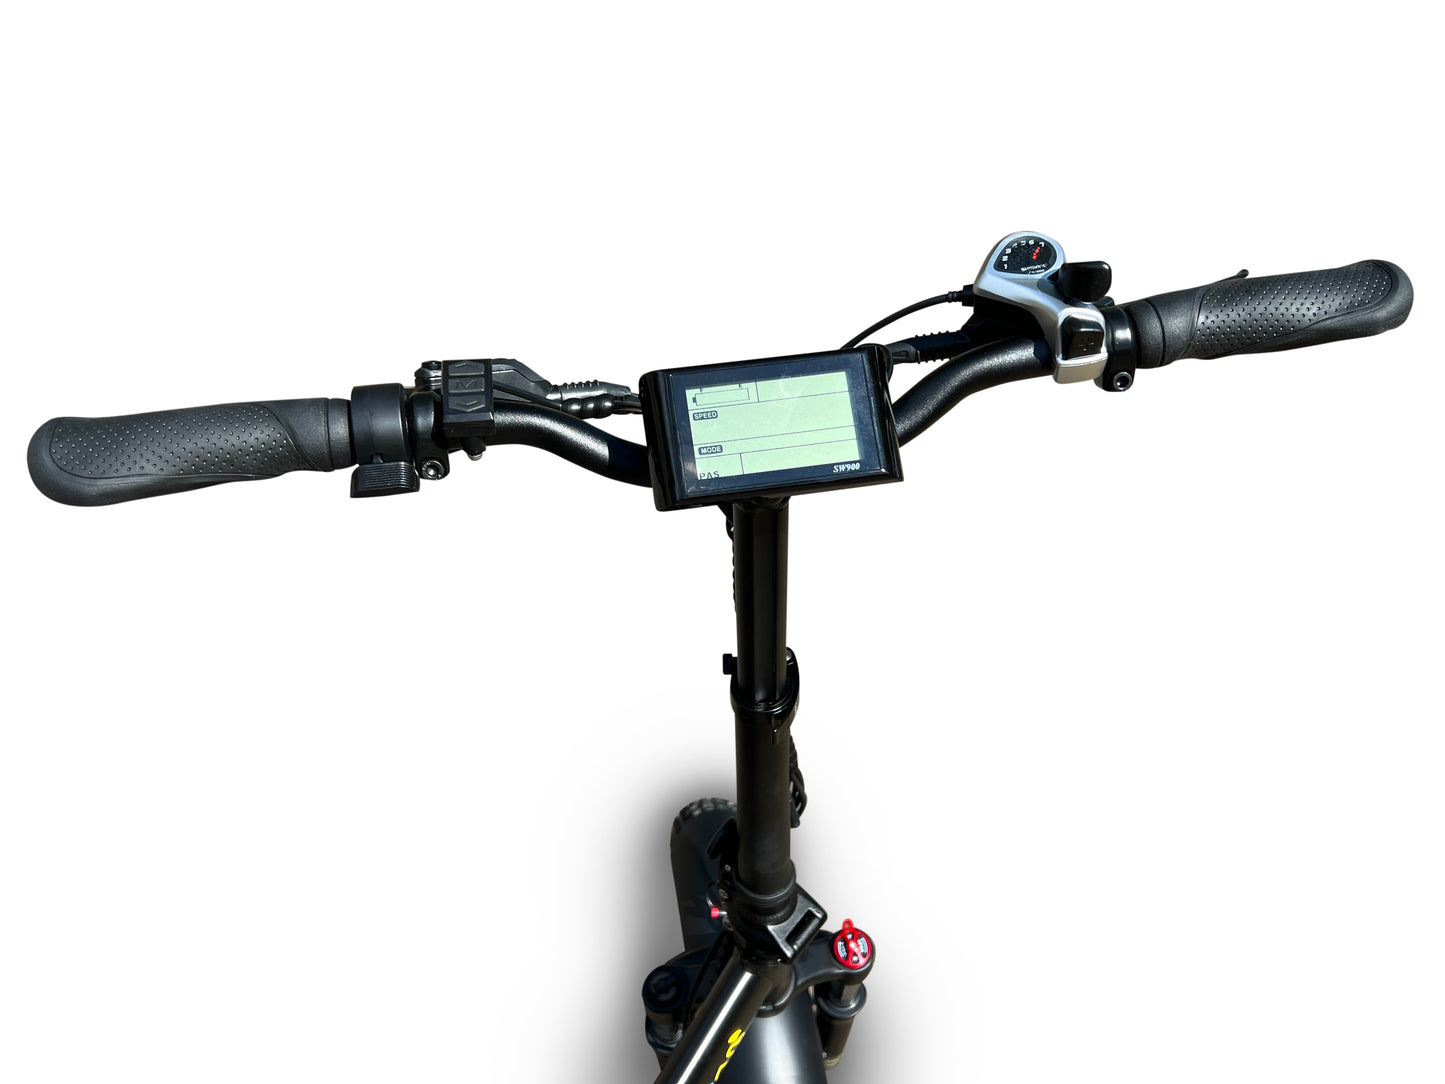 Allegro Electric Bike's sophisticated handlebar with digital display and controls